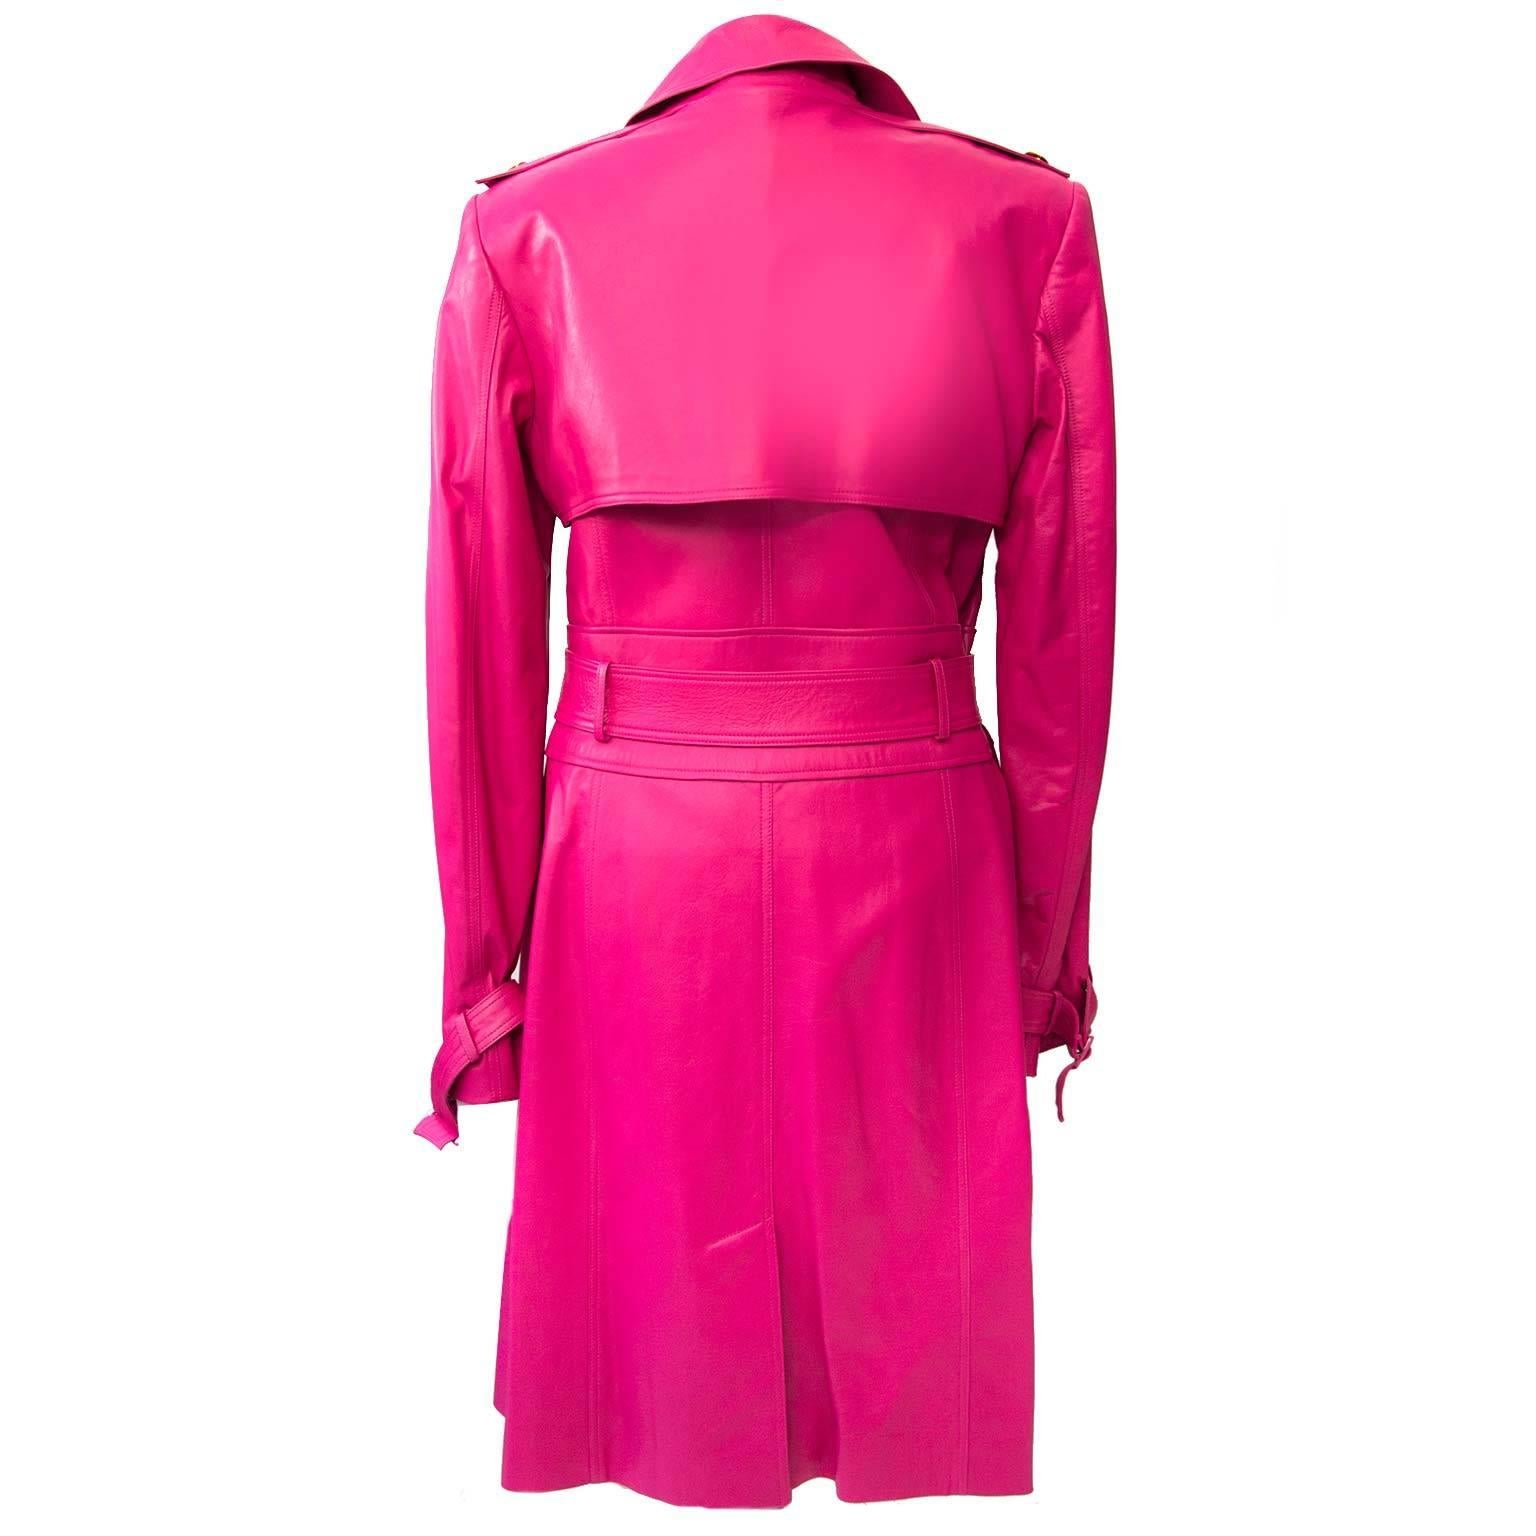 This super soft lambs leather coat was made by Versace in 2011.  
The trenchcoat features four gold metal Medusa buttons to fasten in front, a tie-wrap belt, epaulets and a storm flap on the back.
The interior is fully lined in pink medusa logo